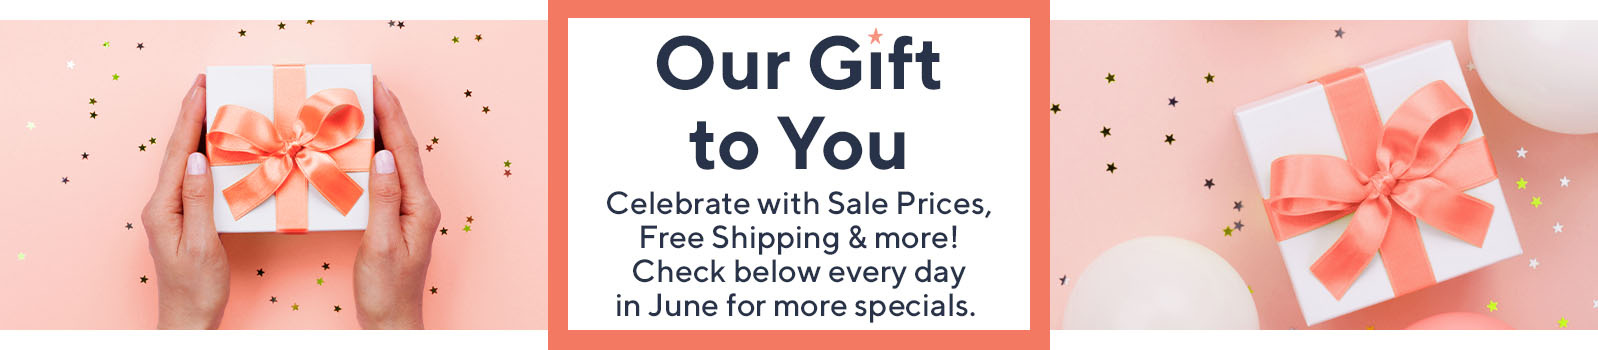 Our Gift to You  Celebrate with Sale Prices, Free Shipping & more! Check below every day in June for more specials. 